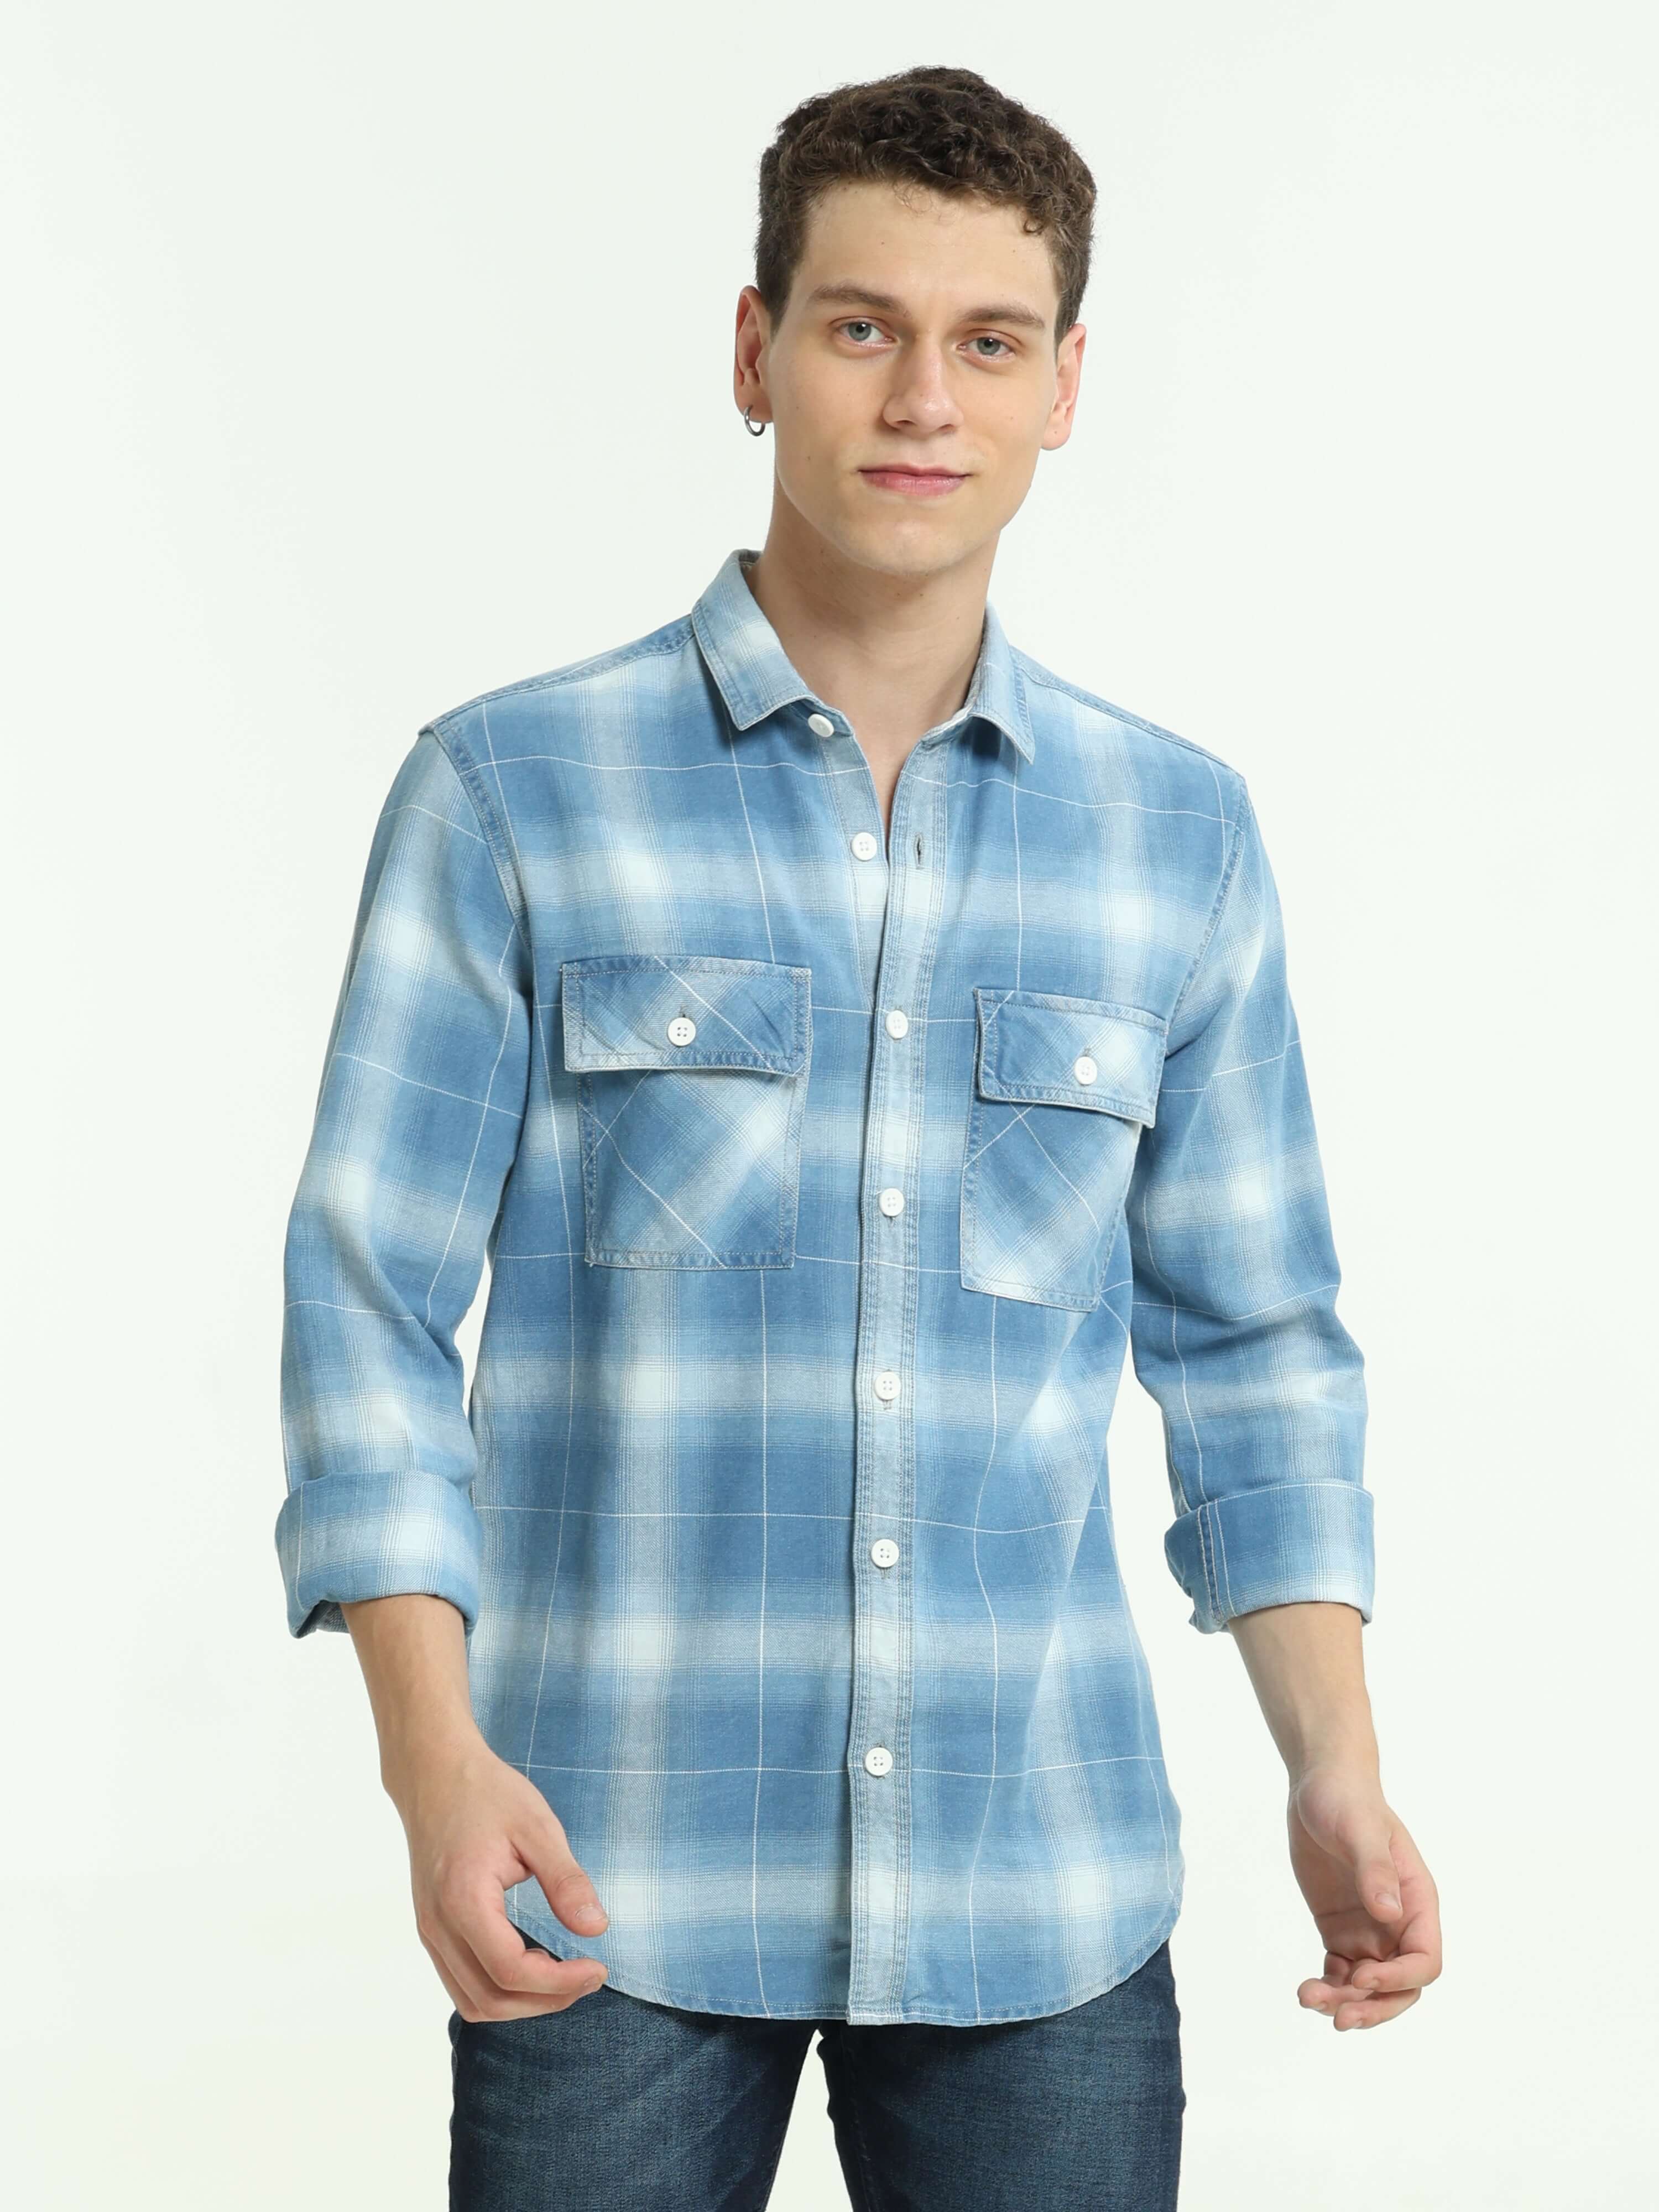 Indigo colored check double pocket shirt shop online at Estilocus. 100% Cotton • Full-sleeve check shirt• Cut and sew placket• Regular collar• Double button edge cuff • Double pocket with flap • Curved bottom hemline . • All double needle construction, fi